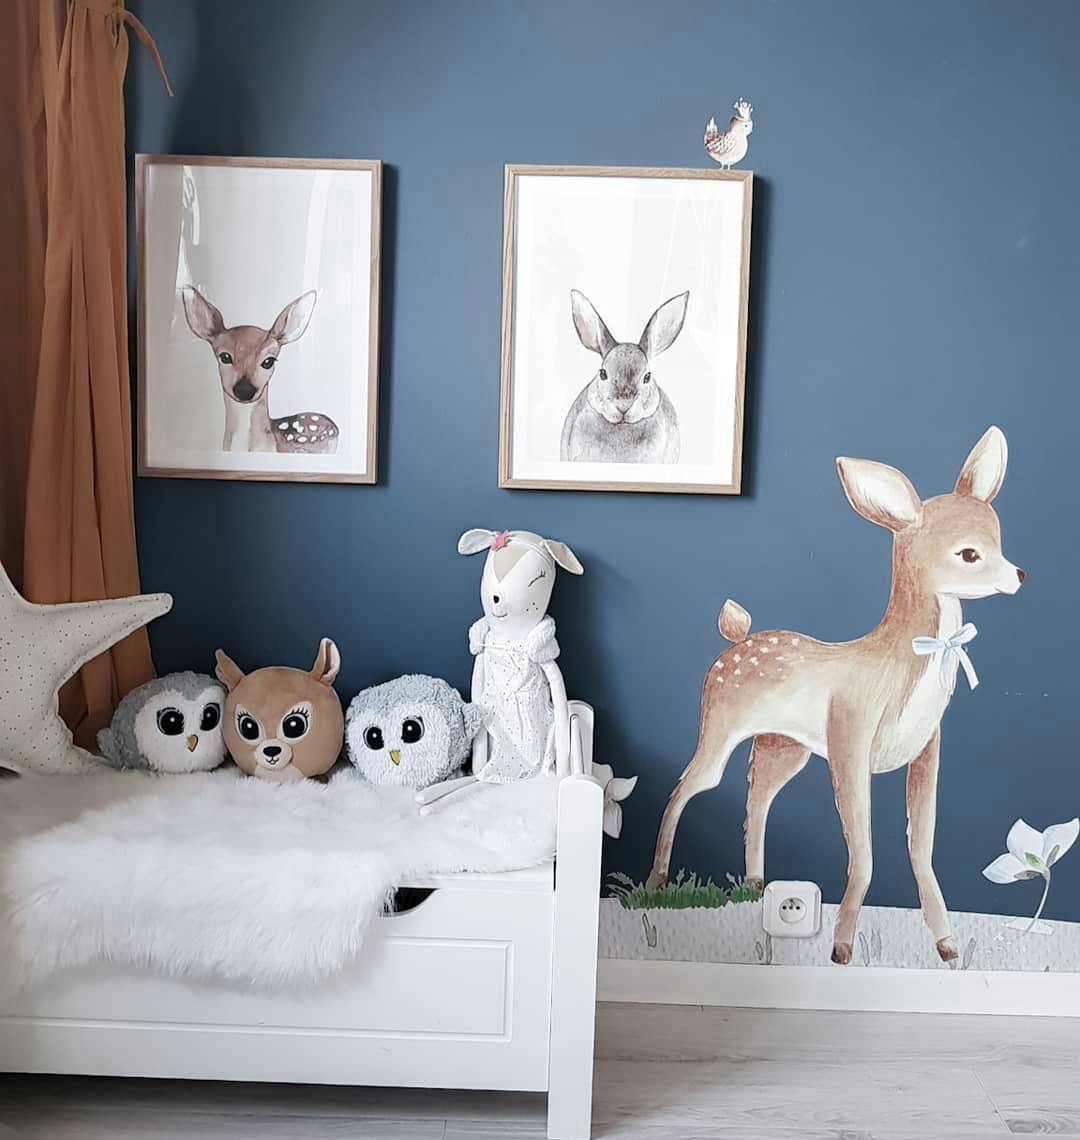 Cute childrens posters with a deer and bunny